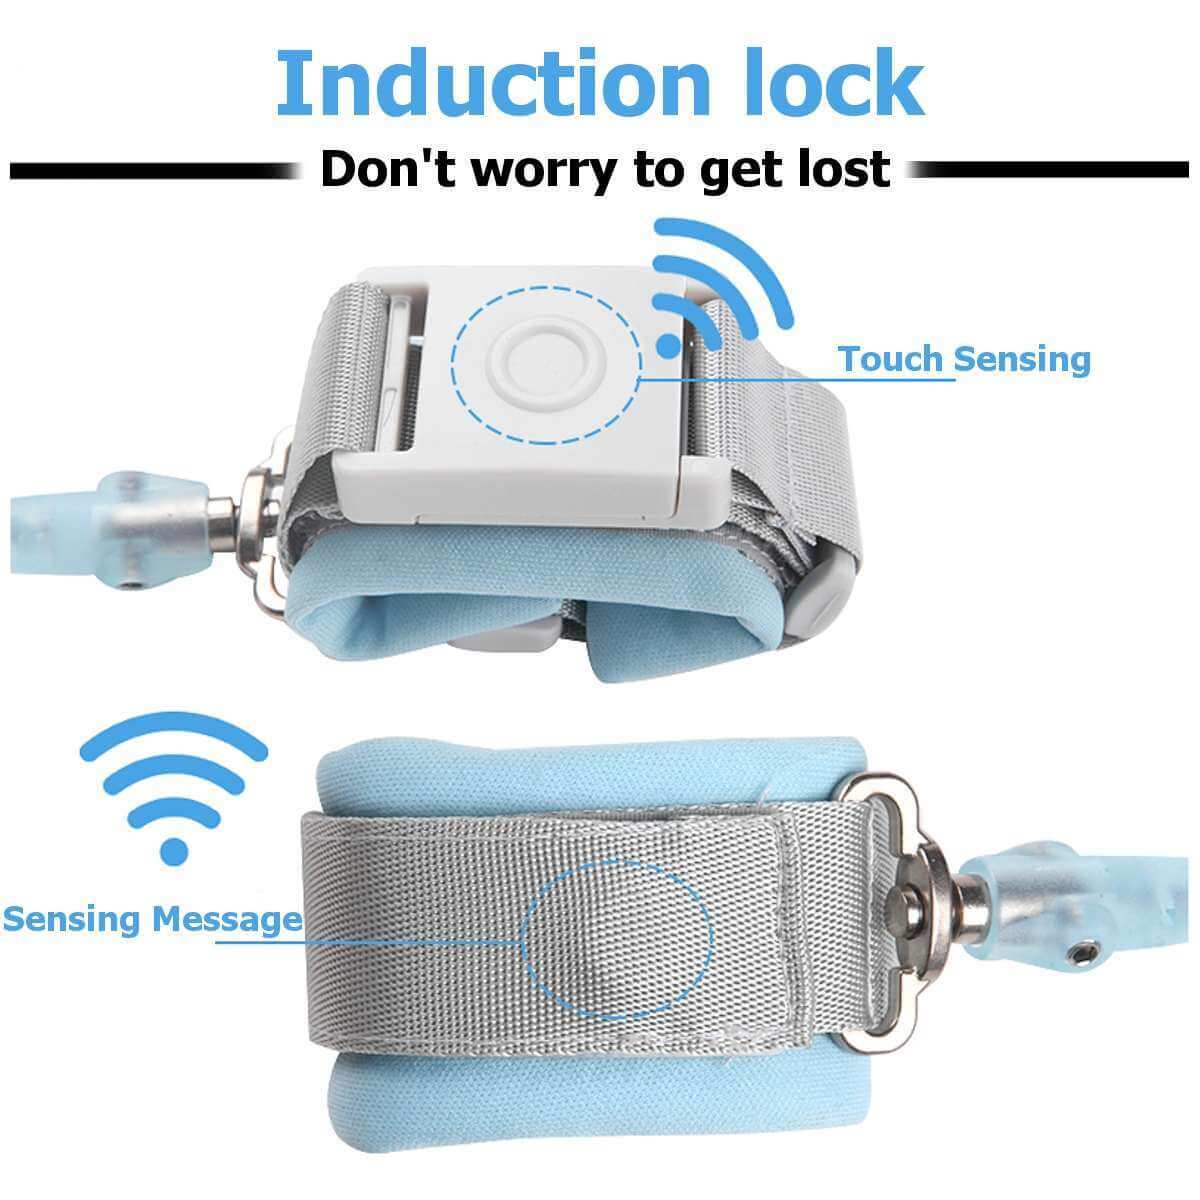 Anti-Lost Wrist Link with Key Lock Toddler Safety Leash & Adjustable Harness BleuRibbon Baby